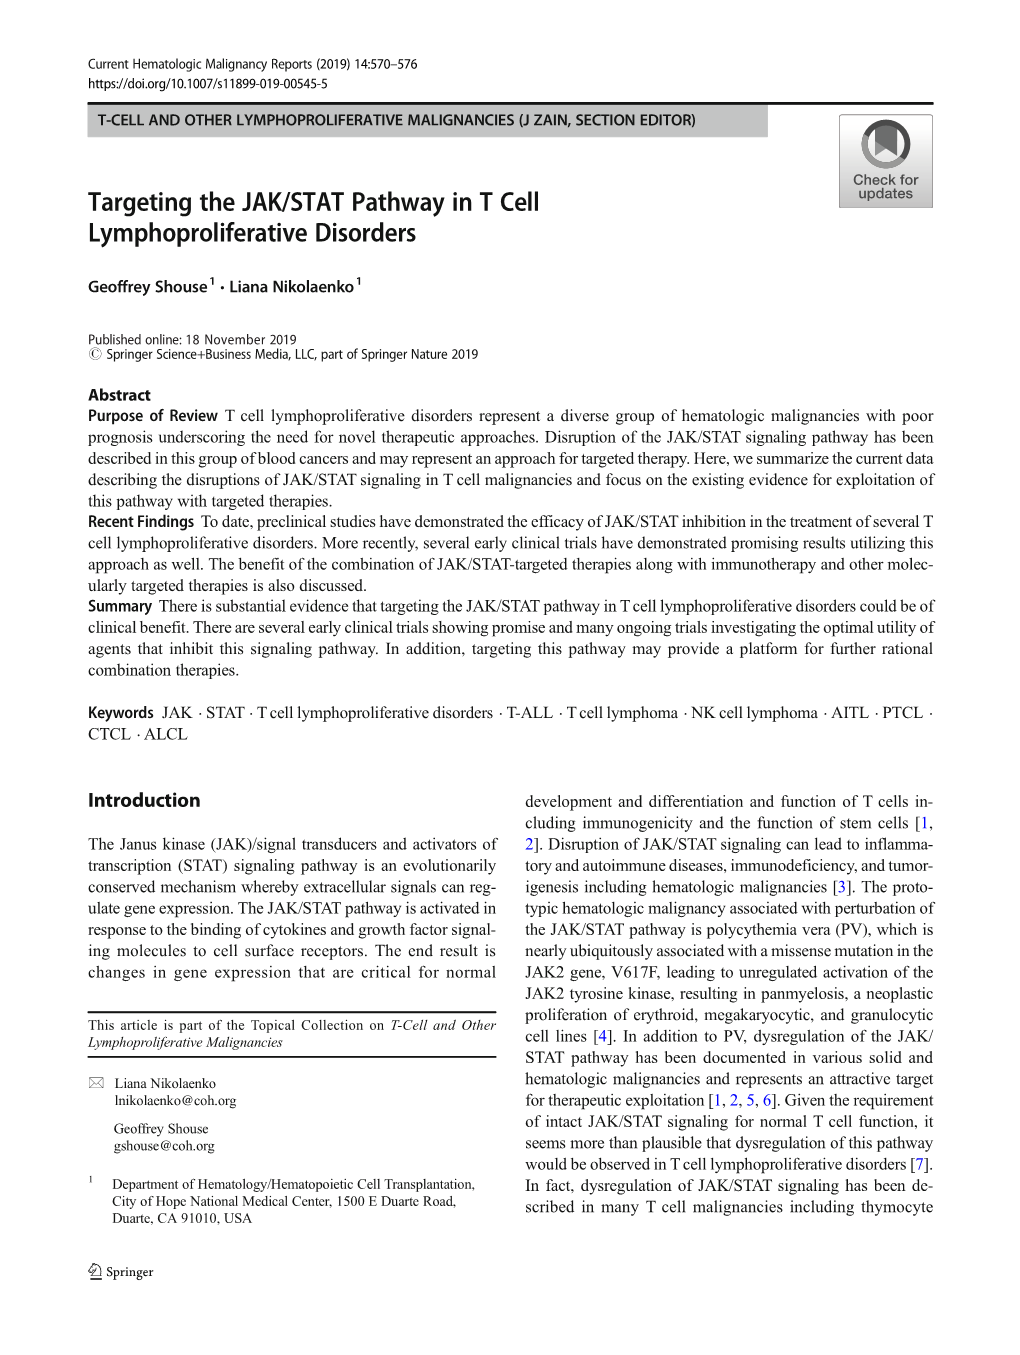 Targeting the JAK/STAT Pathway in T Cell Lymphoproliferative Disorders